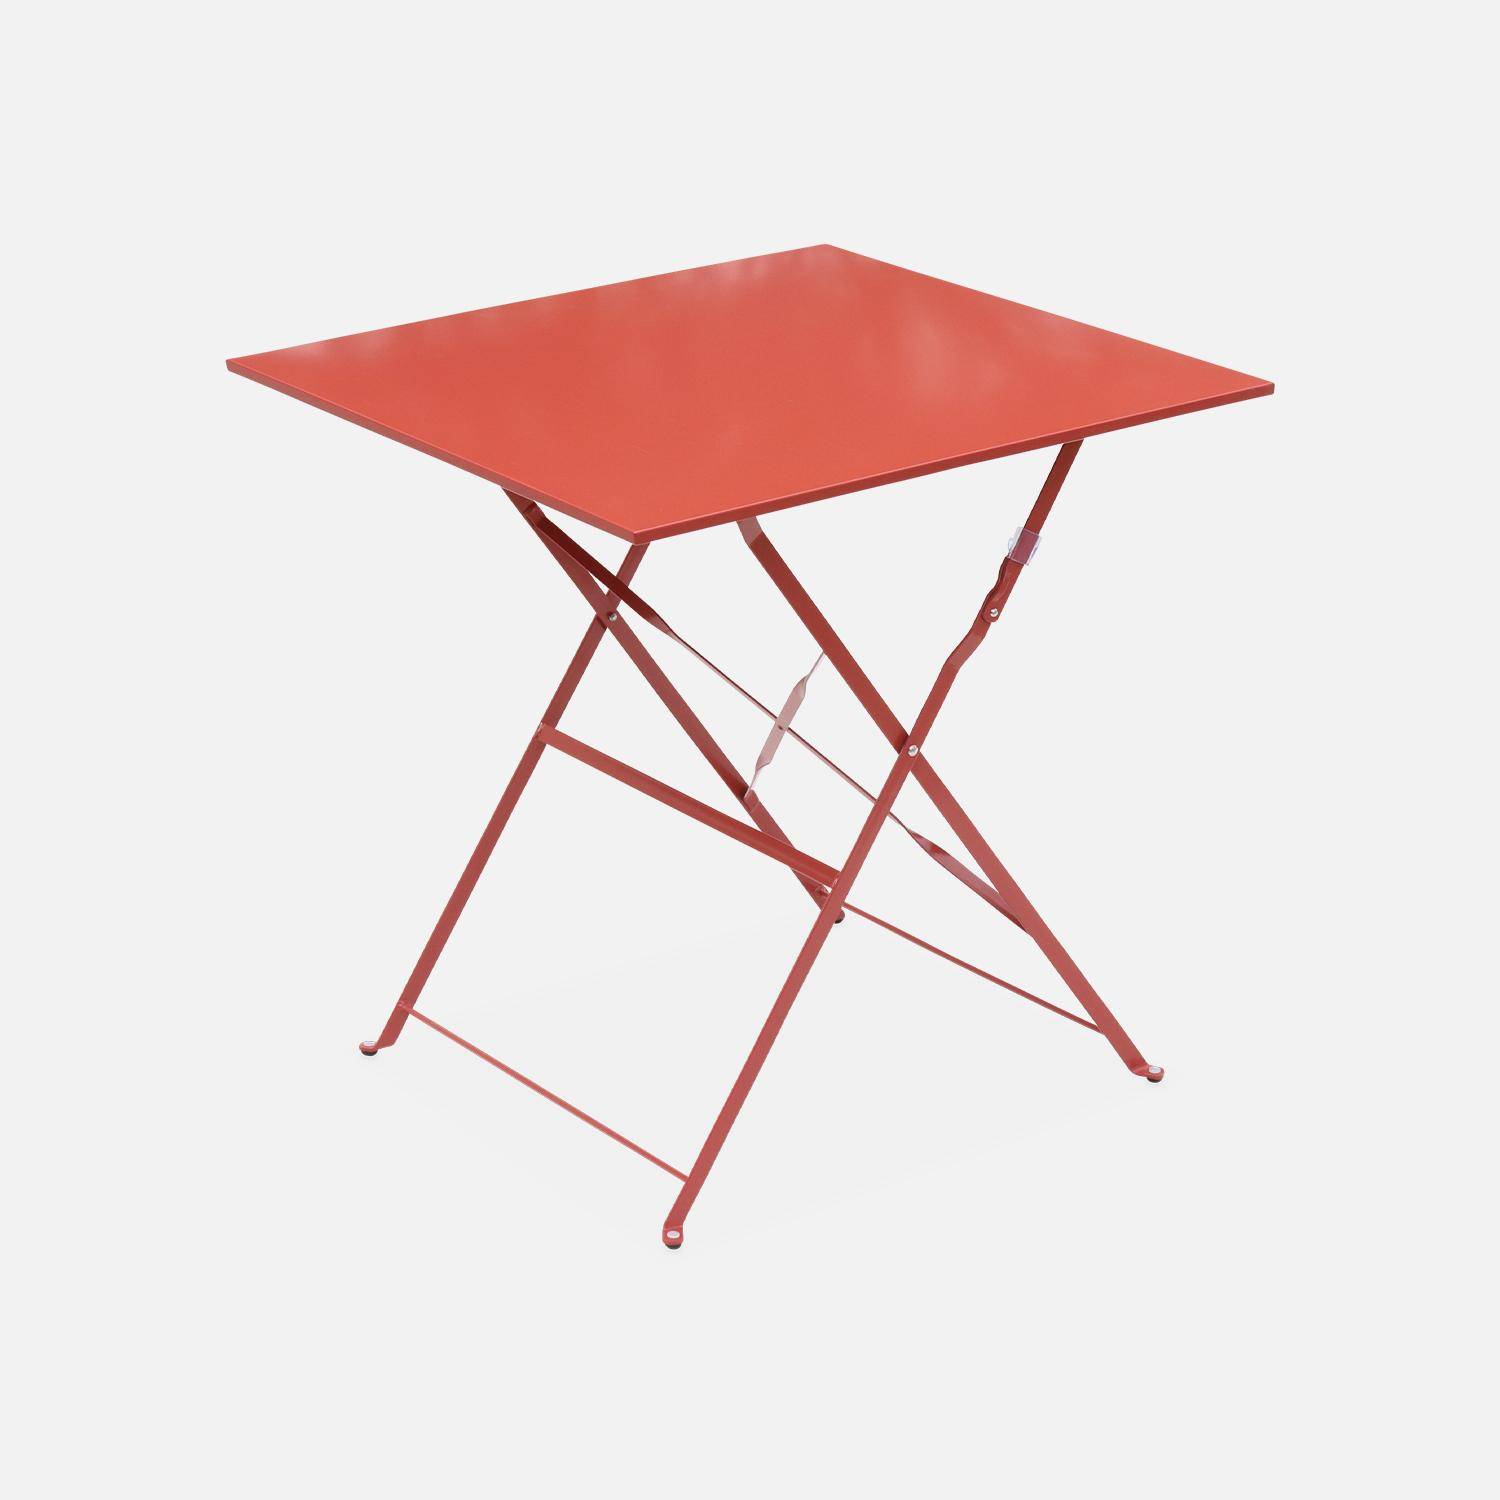 2-seater foldable thermo-lacquered steel bistro garden table, 70x70cm - Emilia - Terracotta,sweeek,Photo3